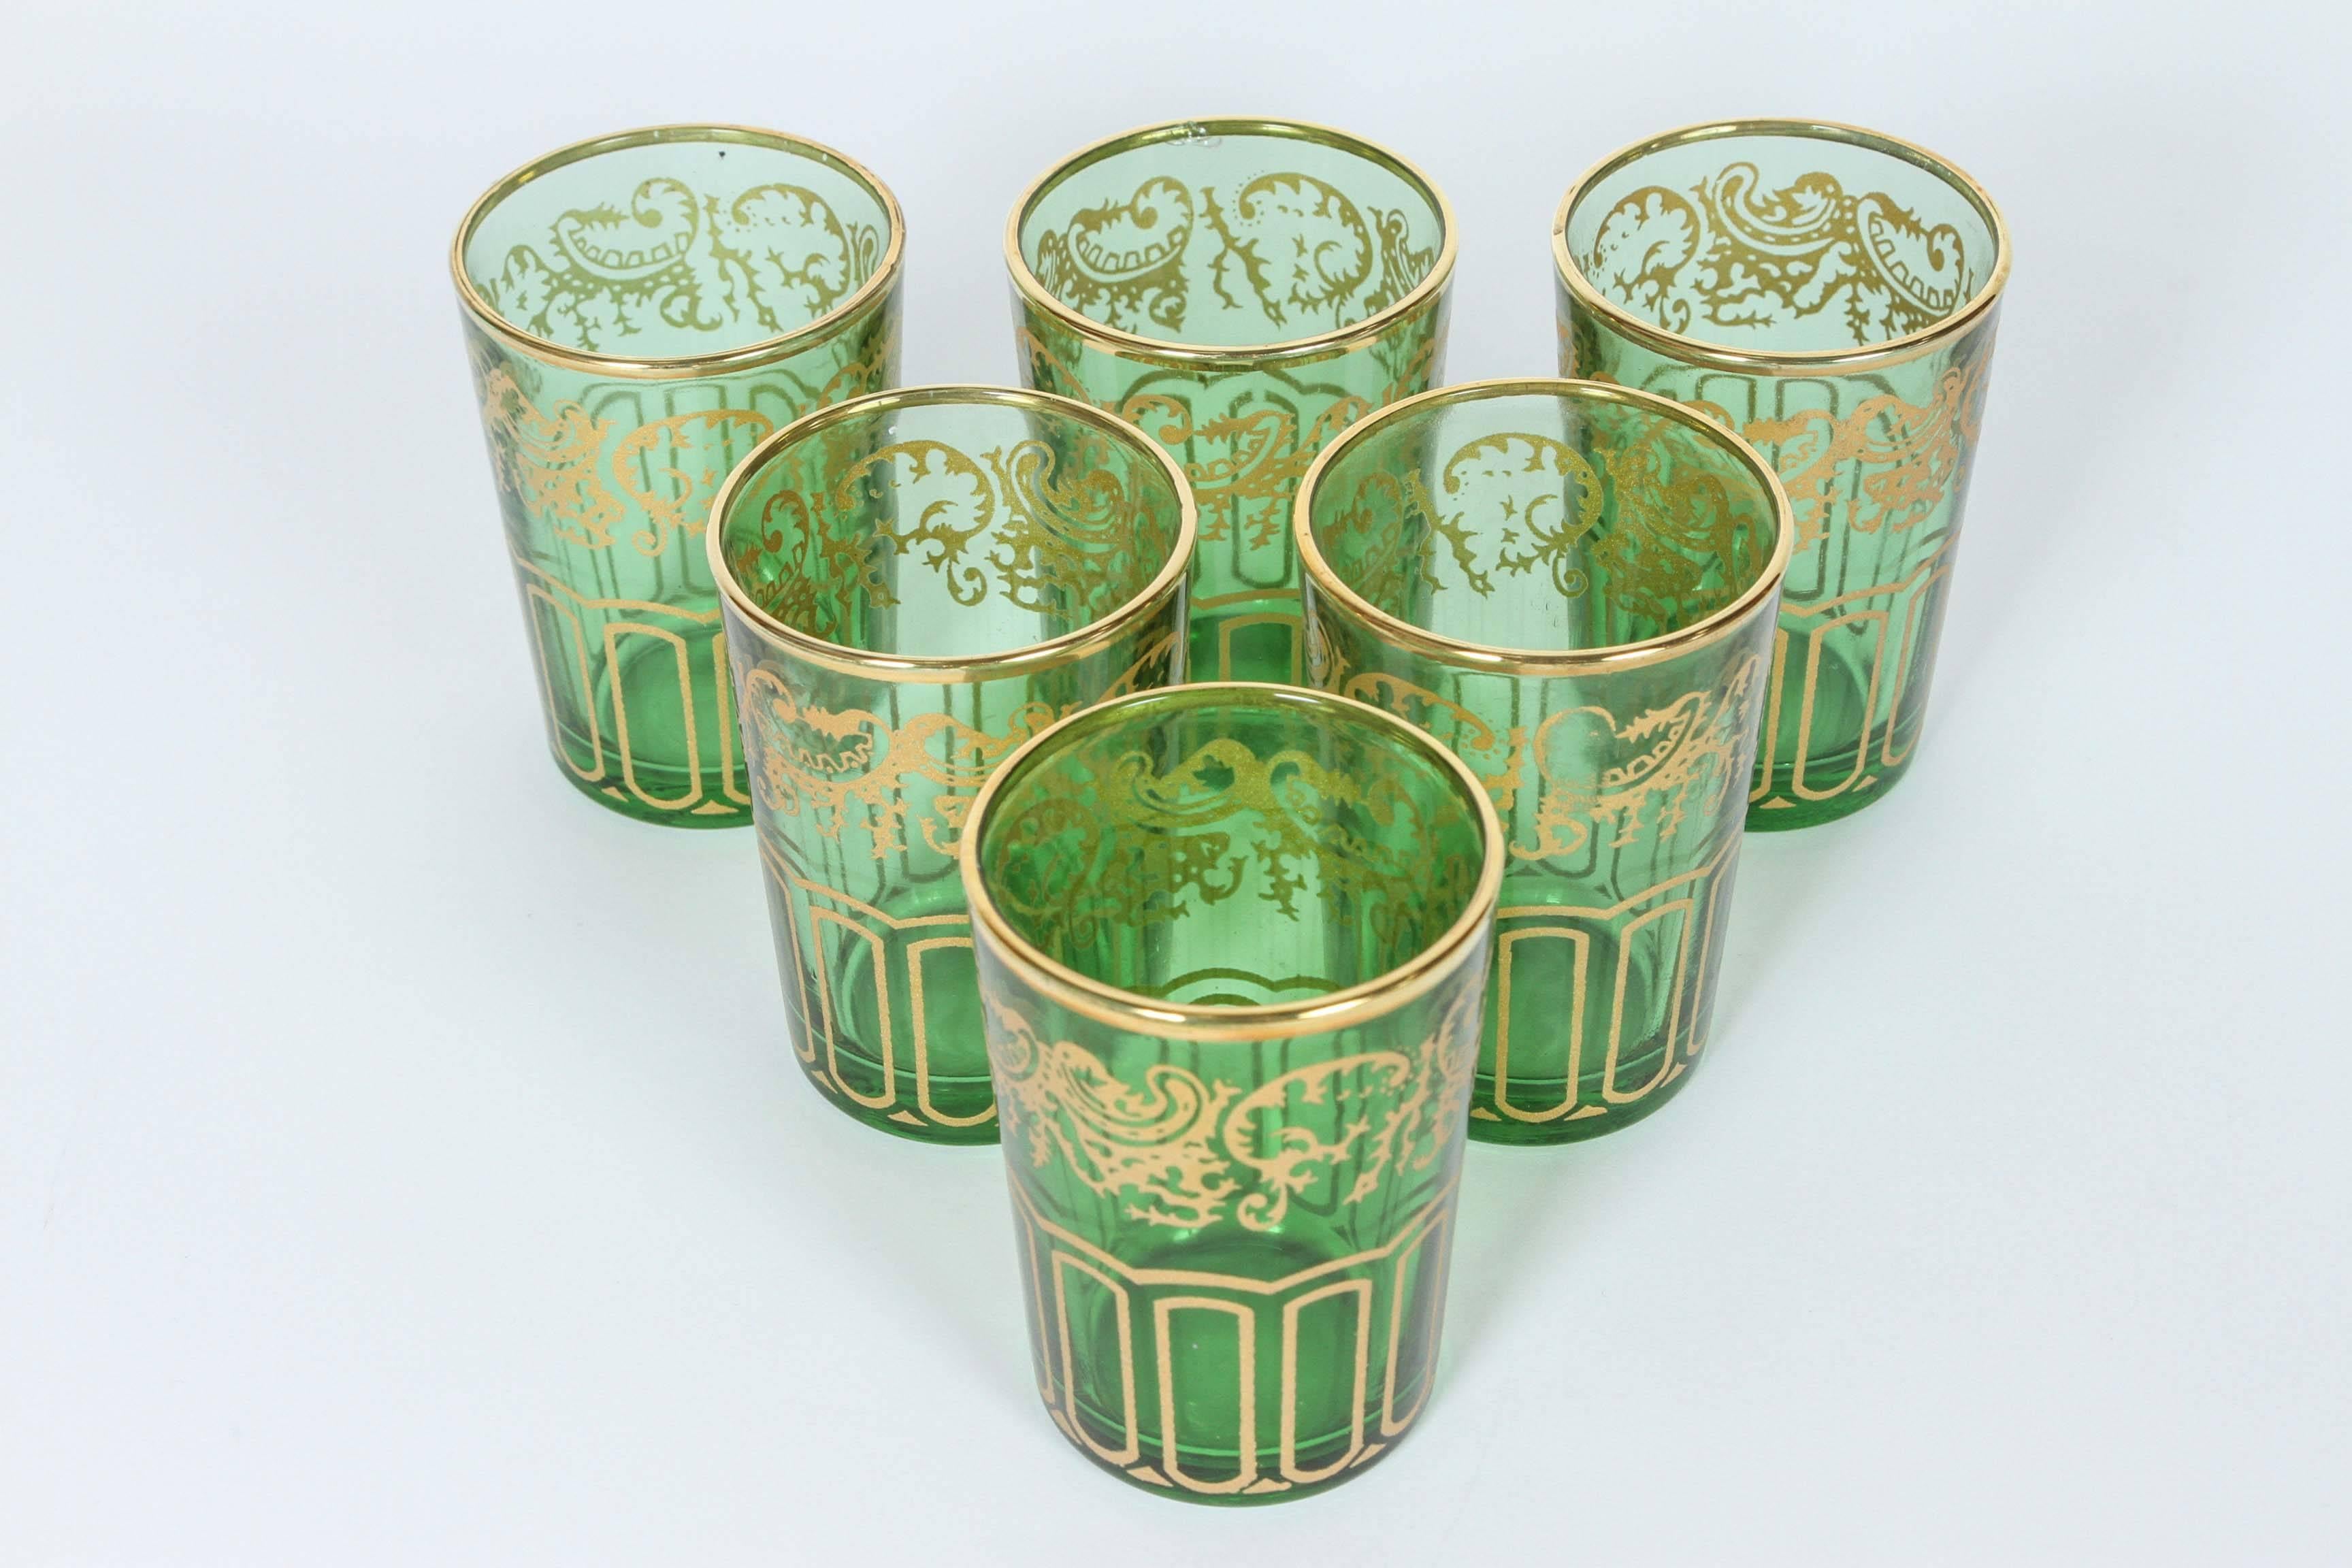 Set of six green and gold Moorish glasses. Handcrafted in Morocco.
Use them for Moroccan tea, or any hot or cold drink.
Multiple sets available.
New in box, old stock.
handmade Czech Bohemia style
  